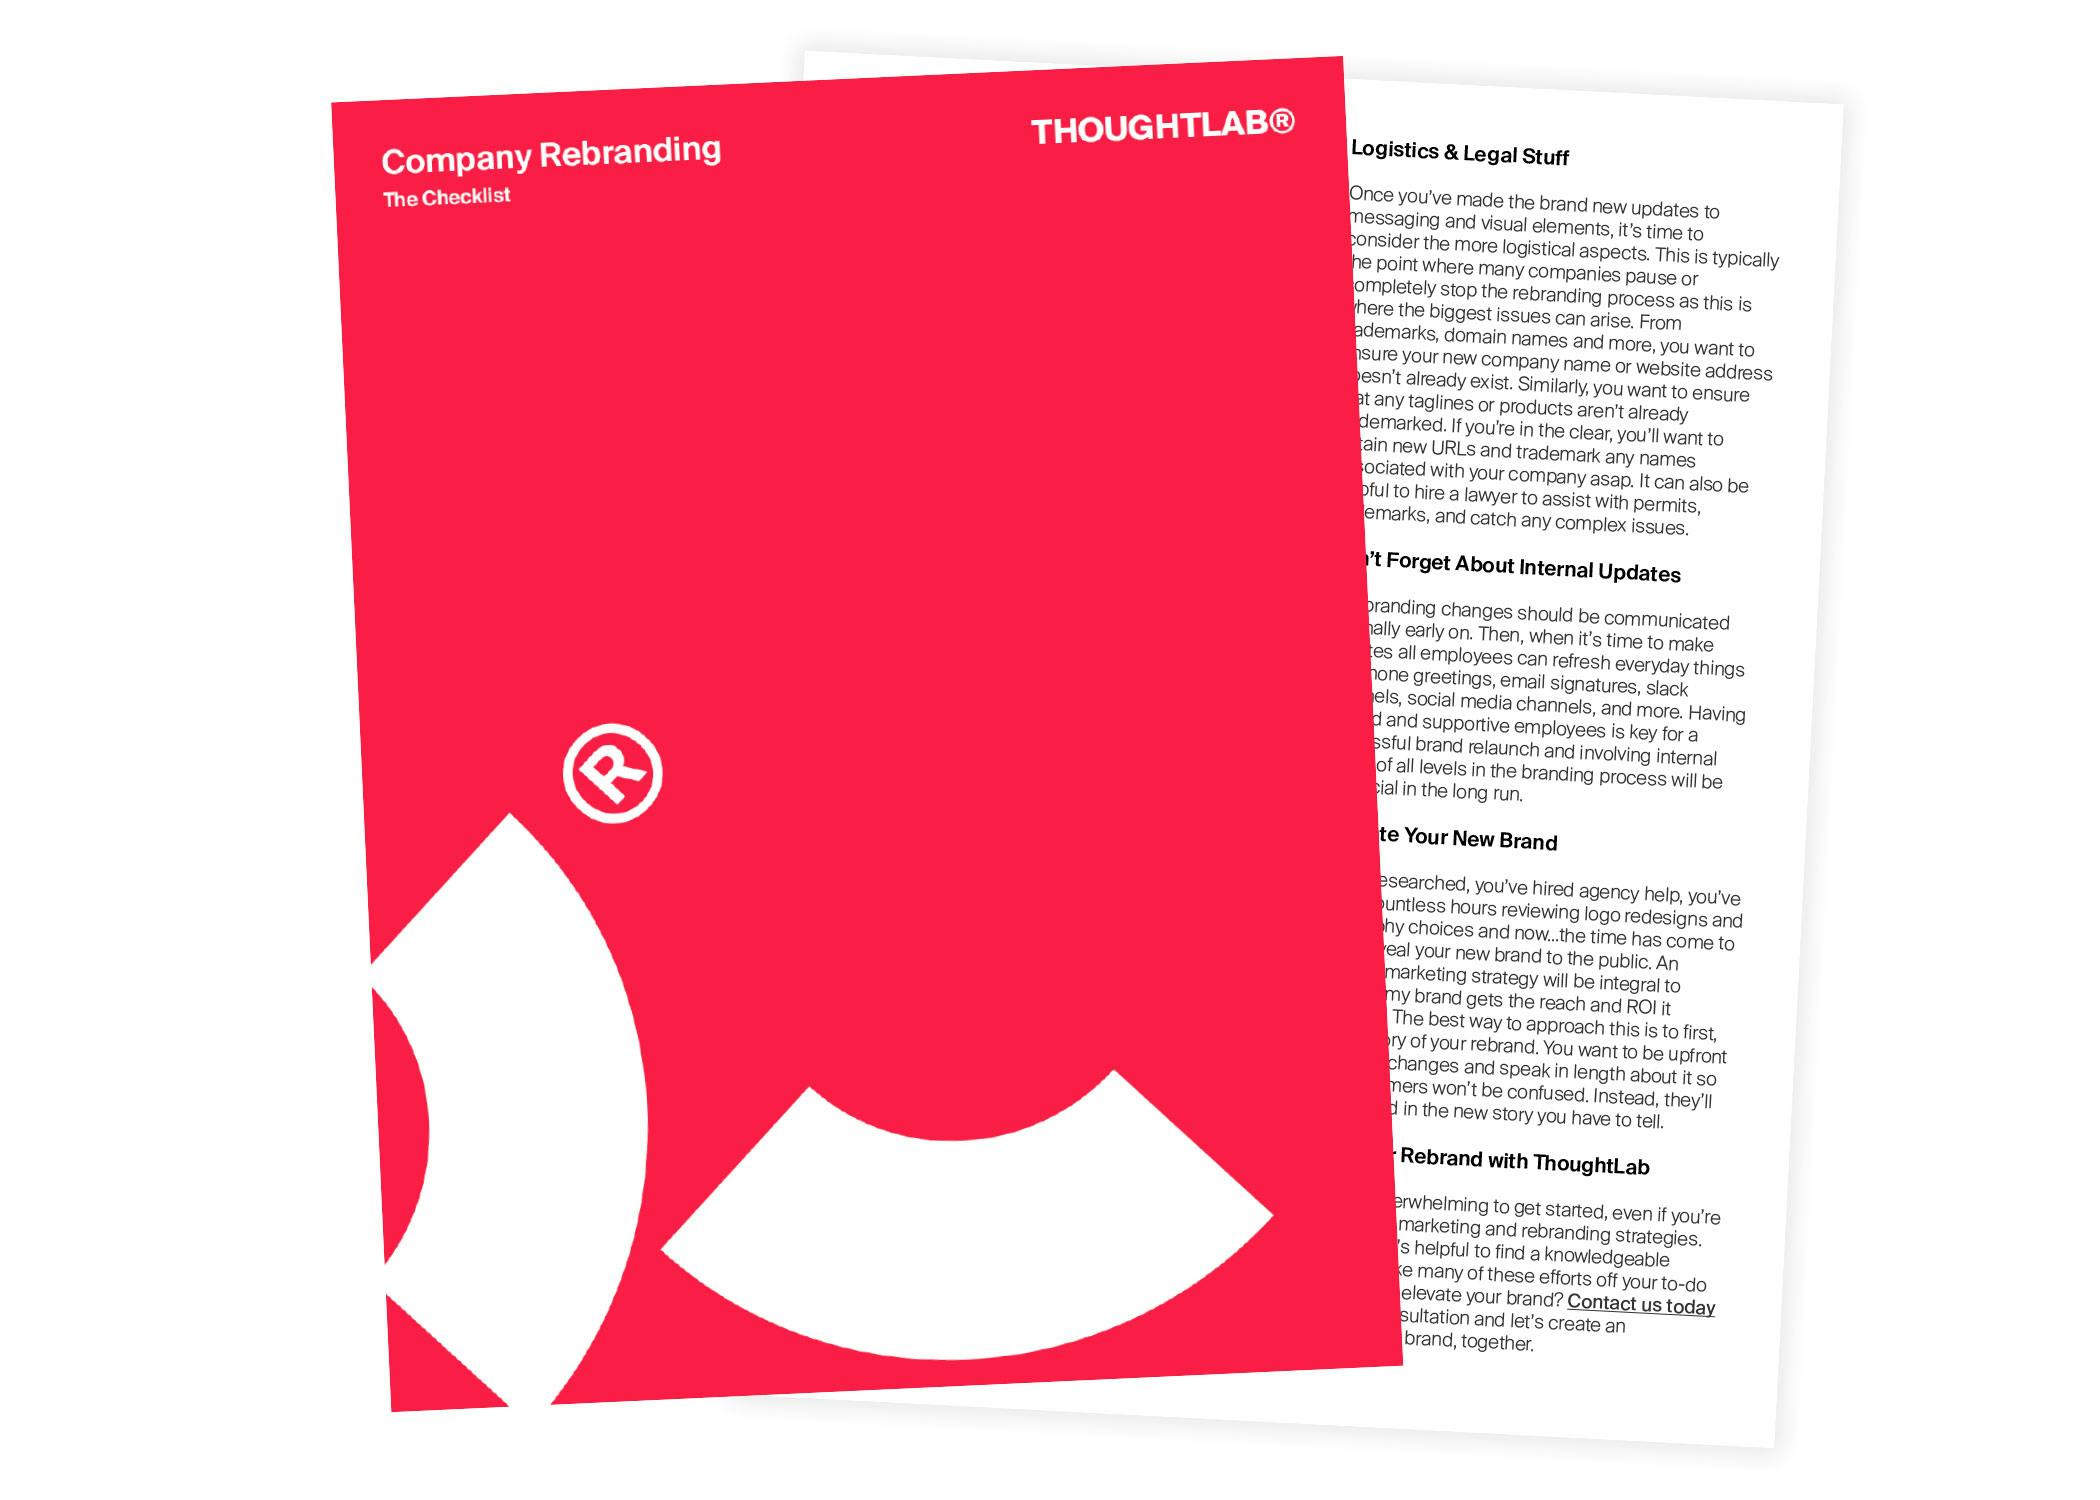 ThoughtLab's Guide to Company Rebranding